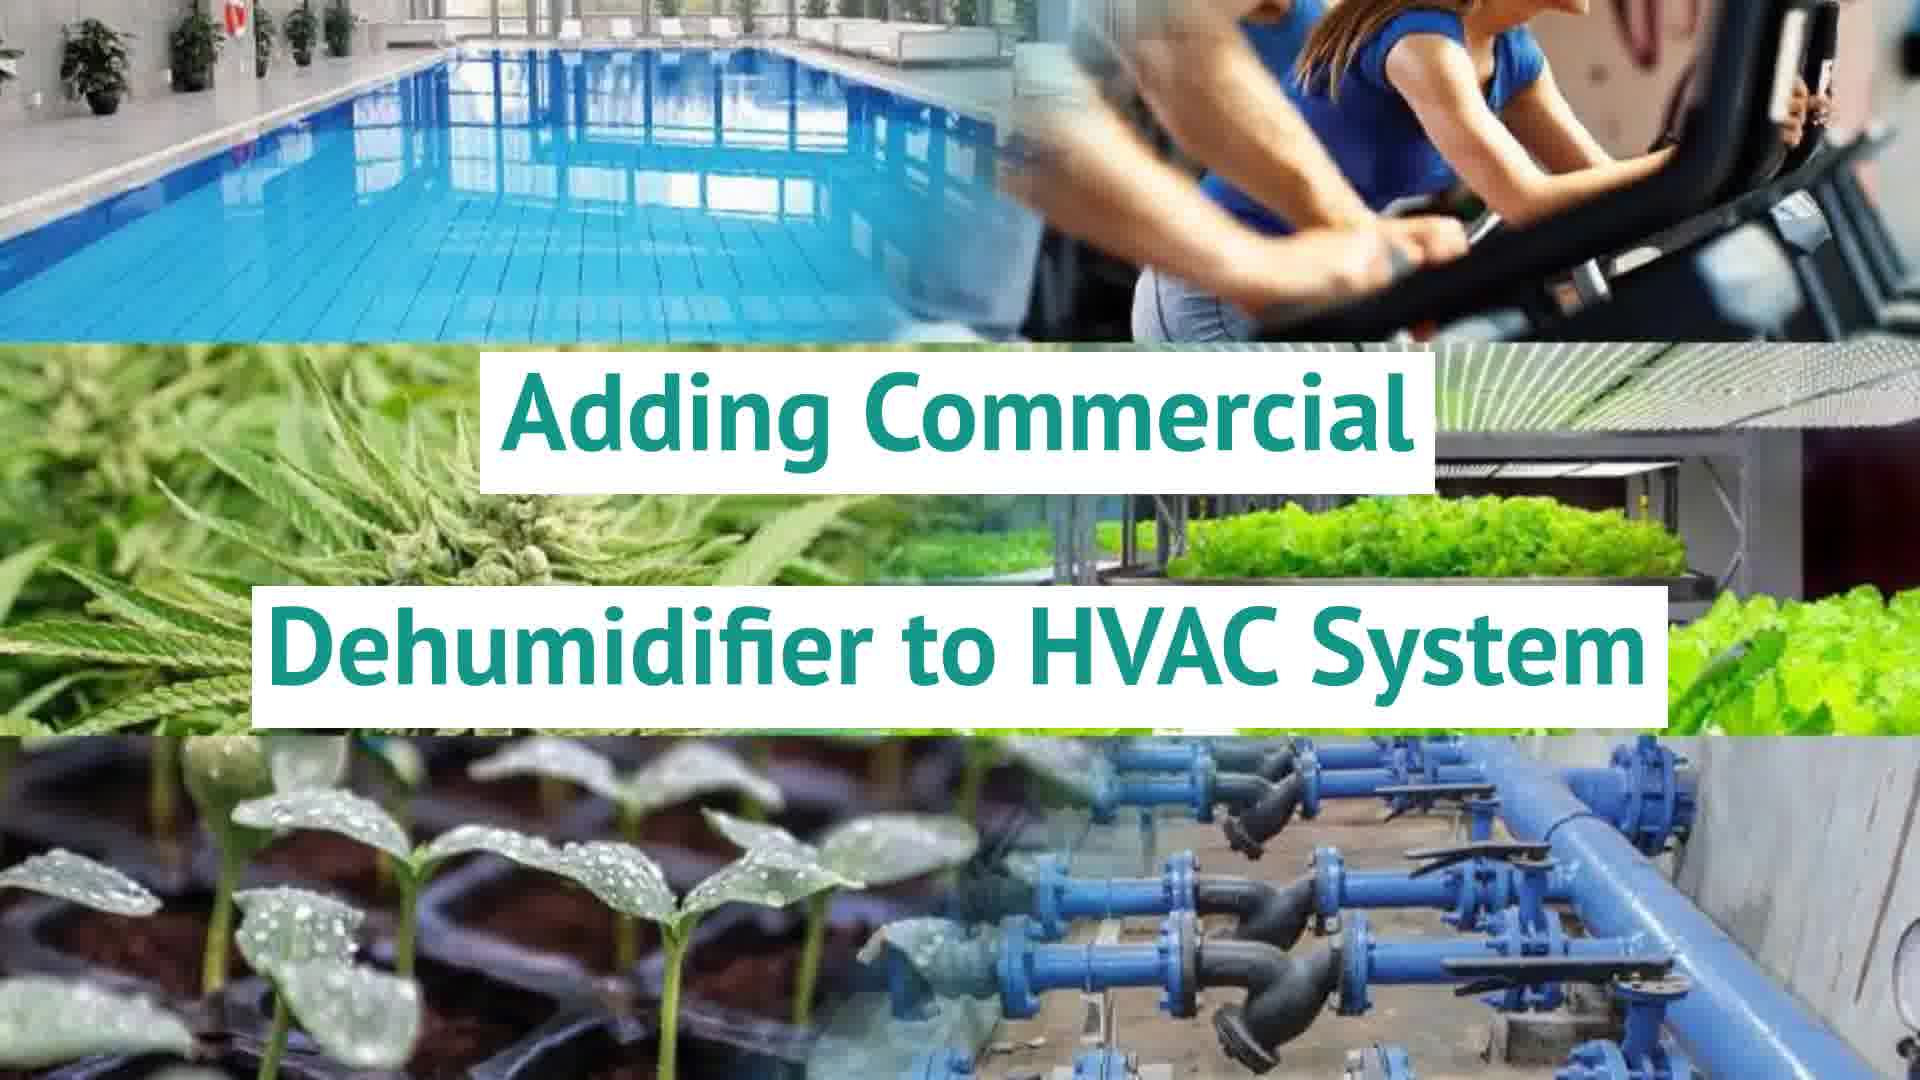 Adding commercial dehumidifier to HVAC_S